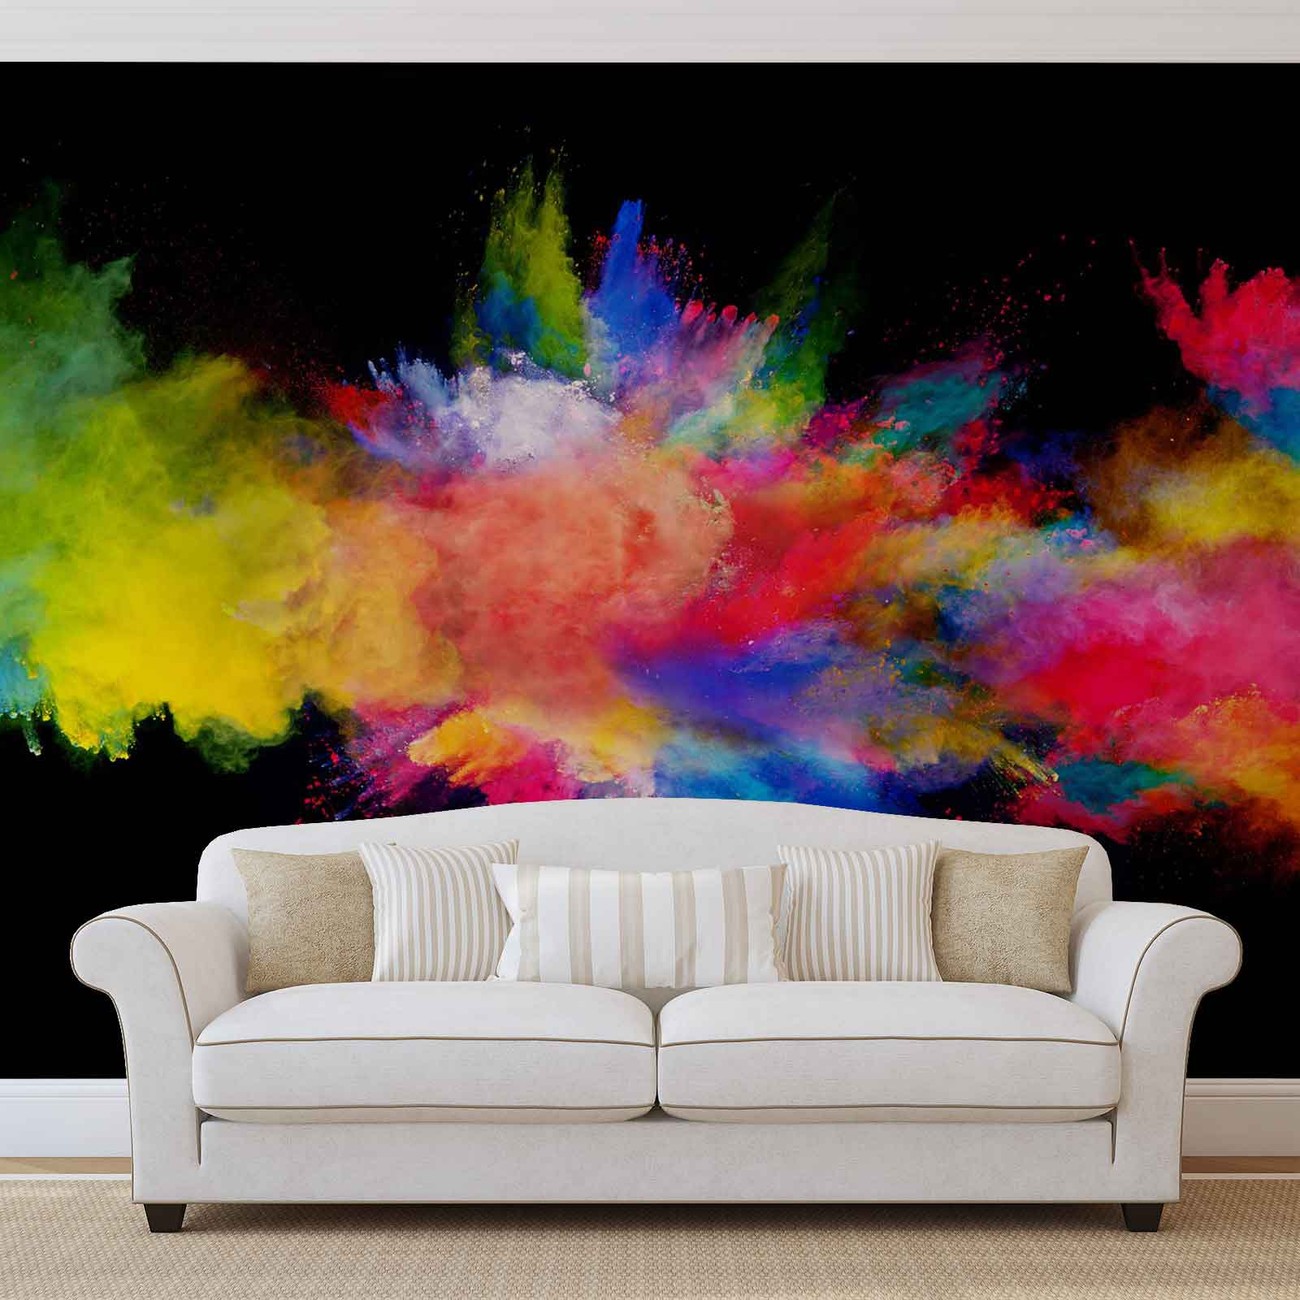 | Buy Explosion Colour EuroPosters Wall Mural Paper at